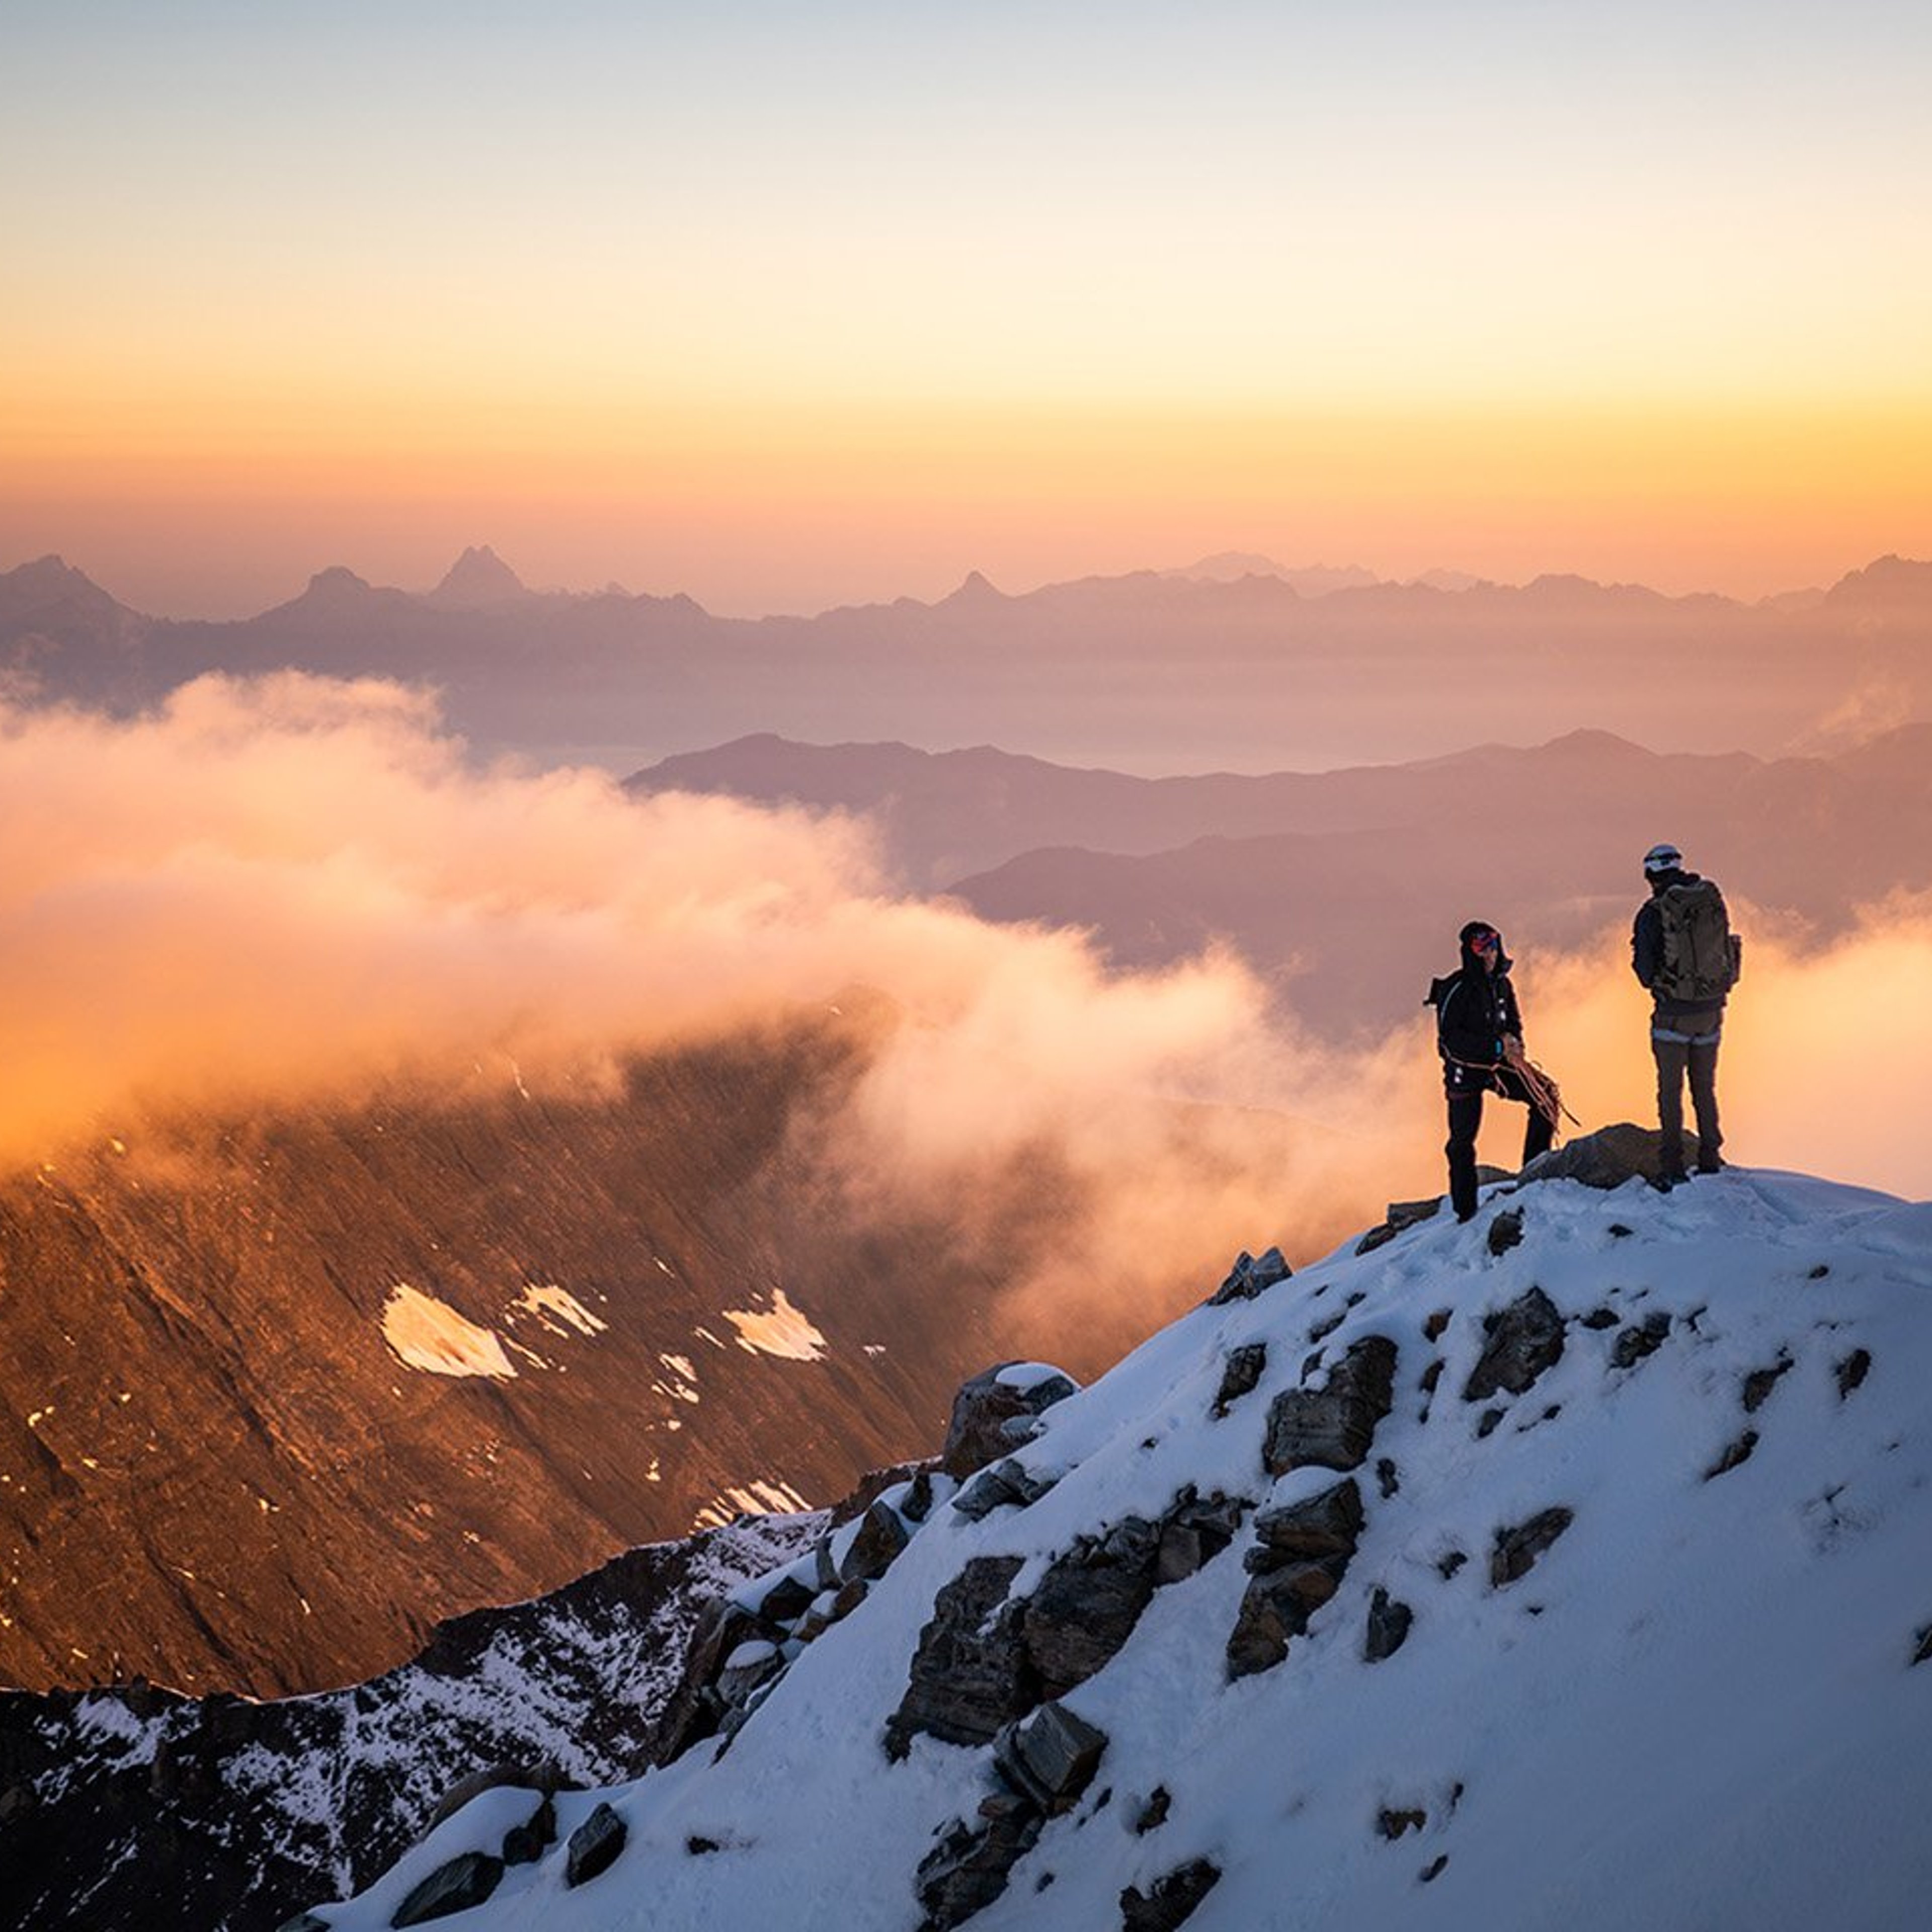 Two figures stand on the peak on a snow coverd mountain against a dramtic sunrise sky